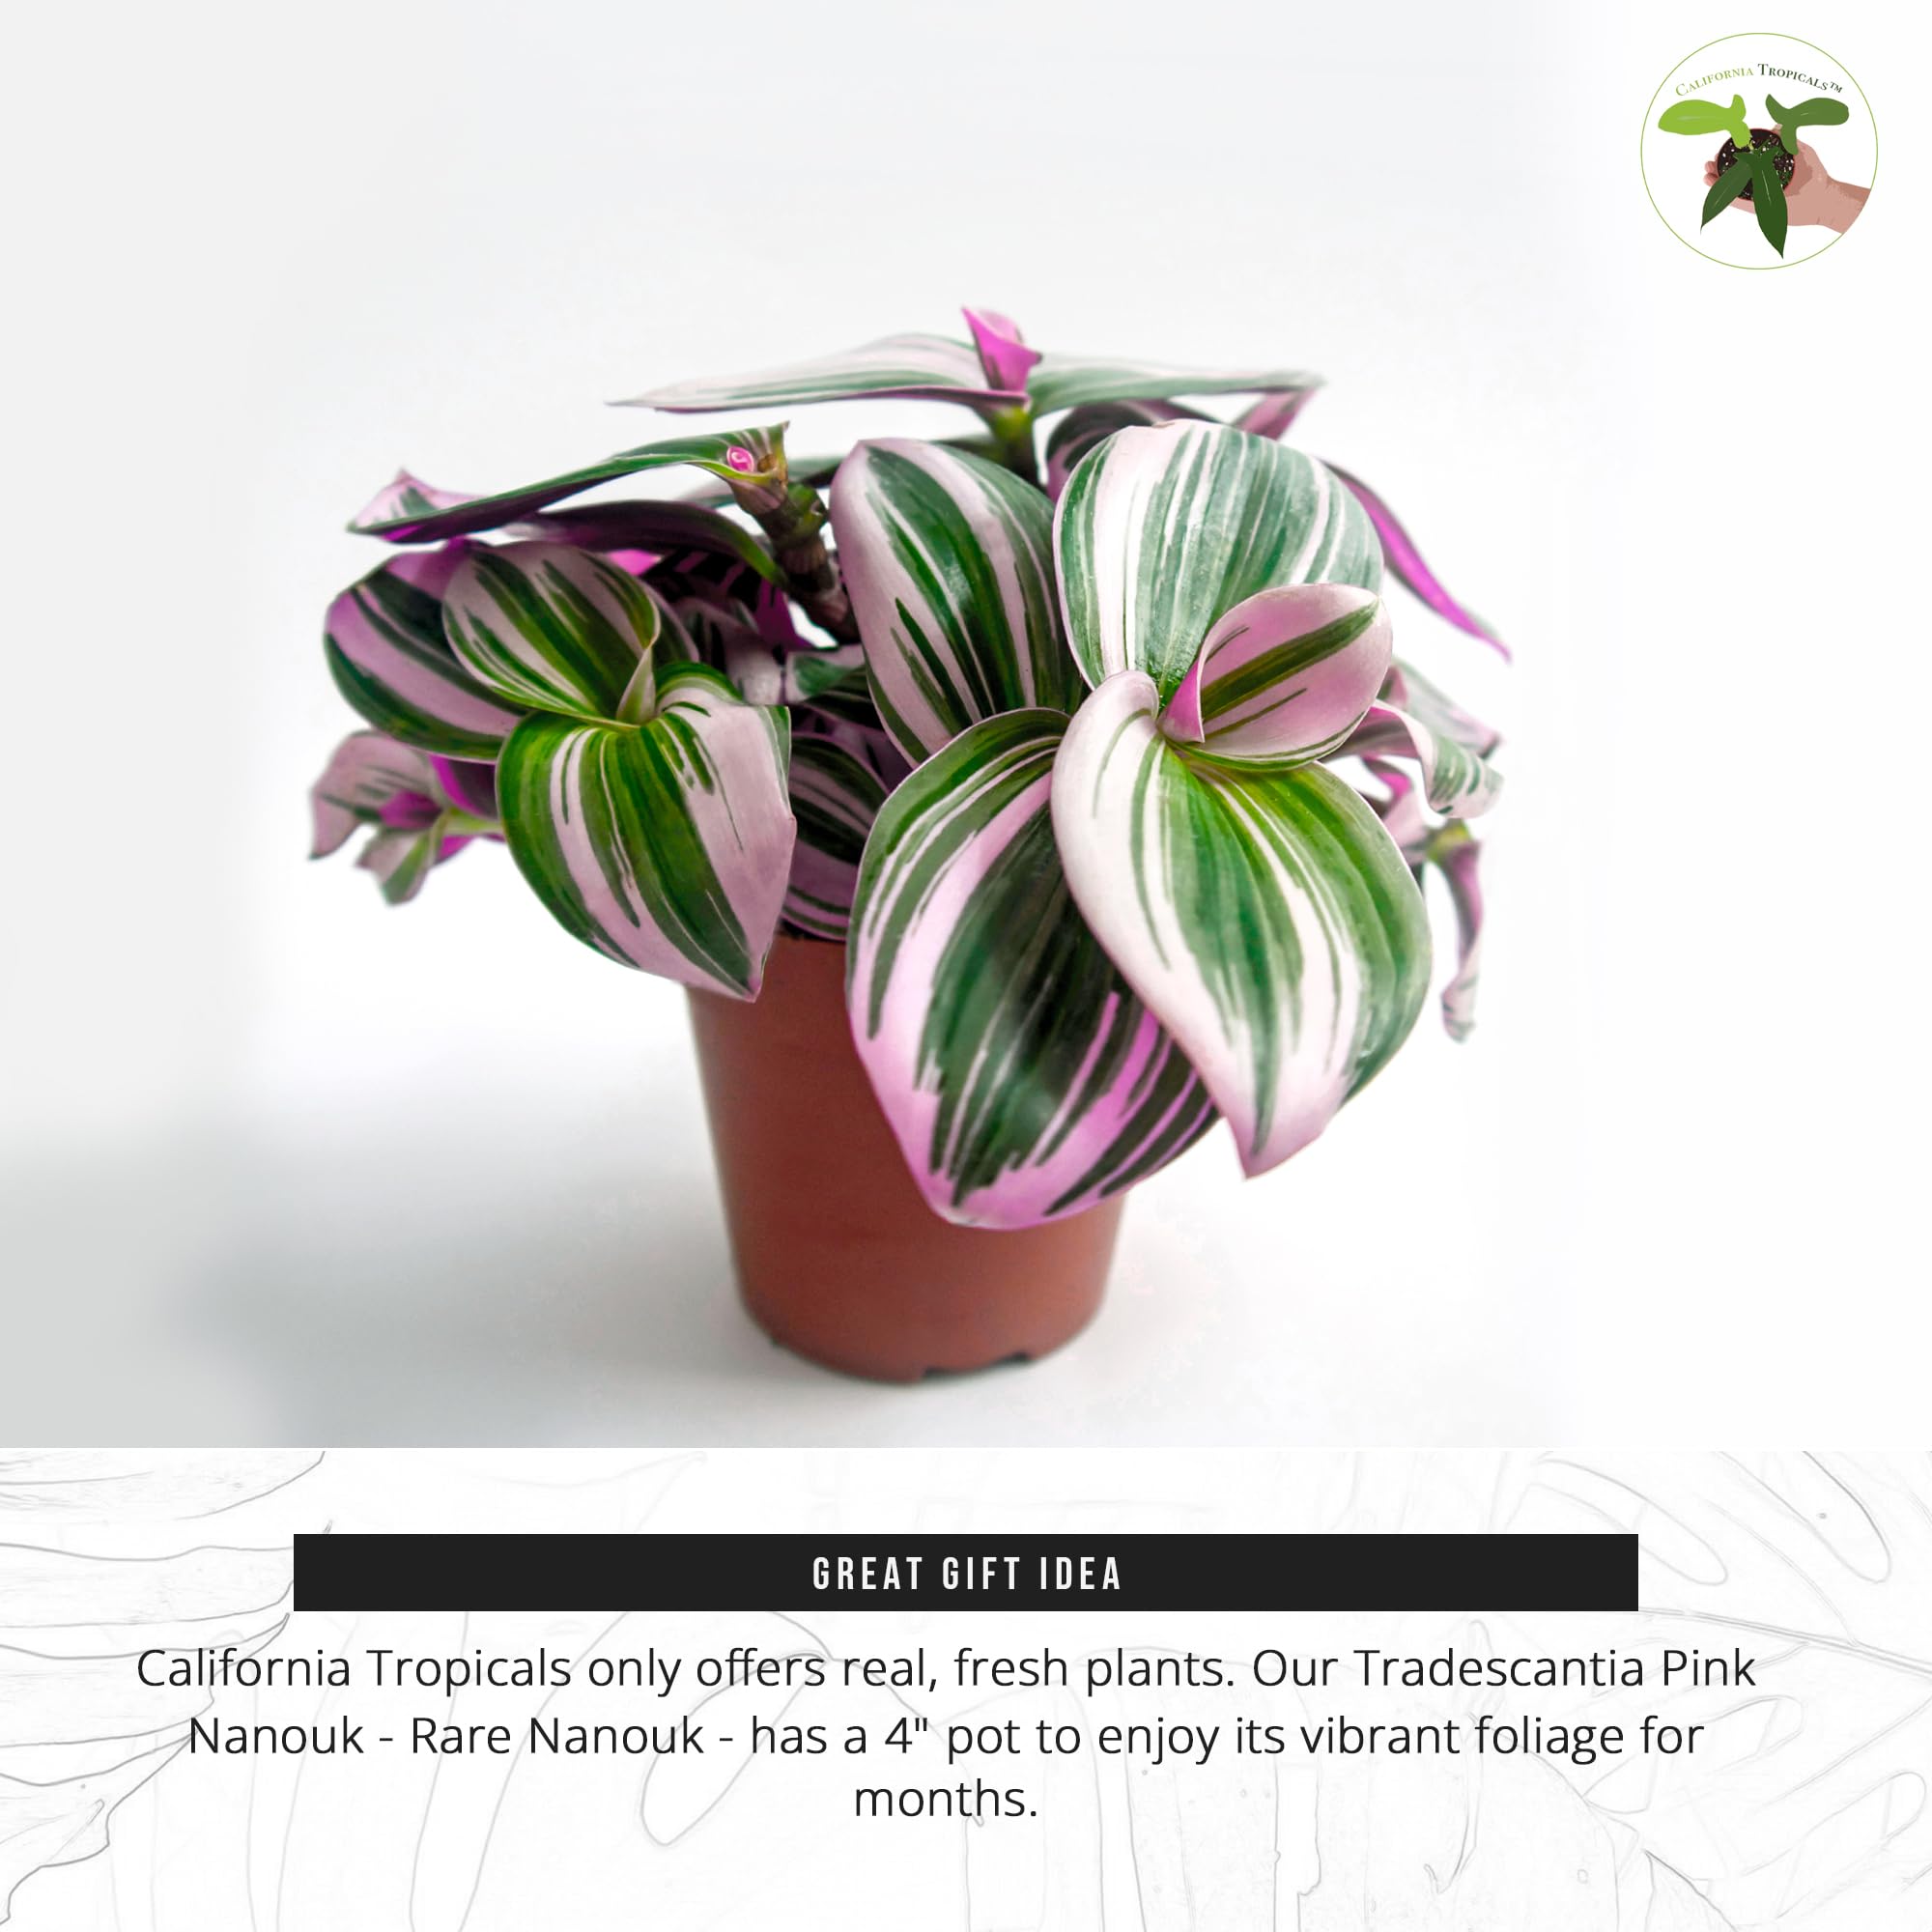 California Tropicals Pink Tradescantia - Rare Nanouk - Live Houseplant Potted in Soil with Rooted Leaves - Easy Care Indoor Outdoor Plant, Mini Tiny Tropical Plant Garden, 4 inch Pot